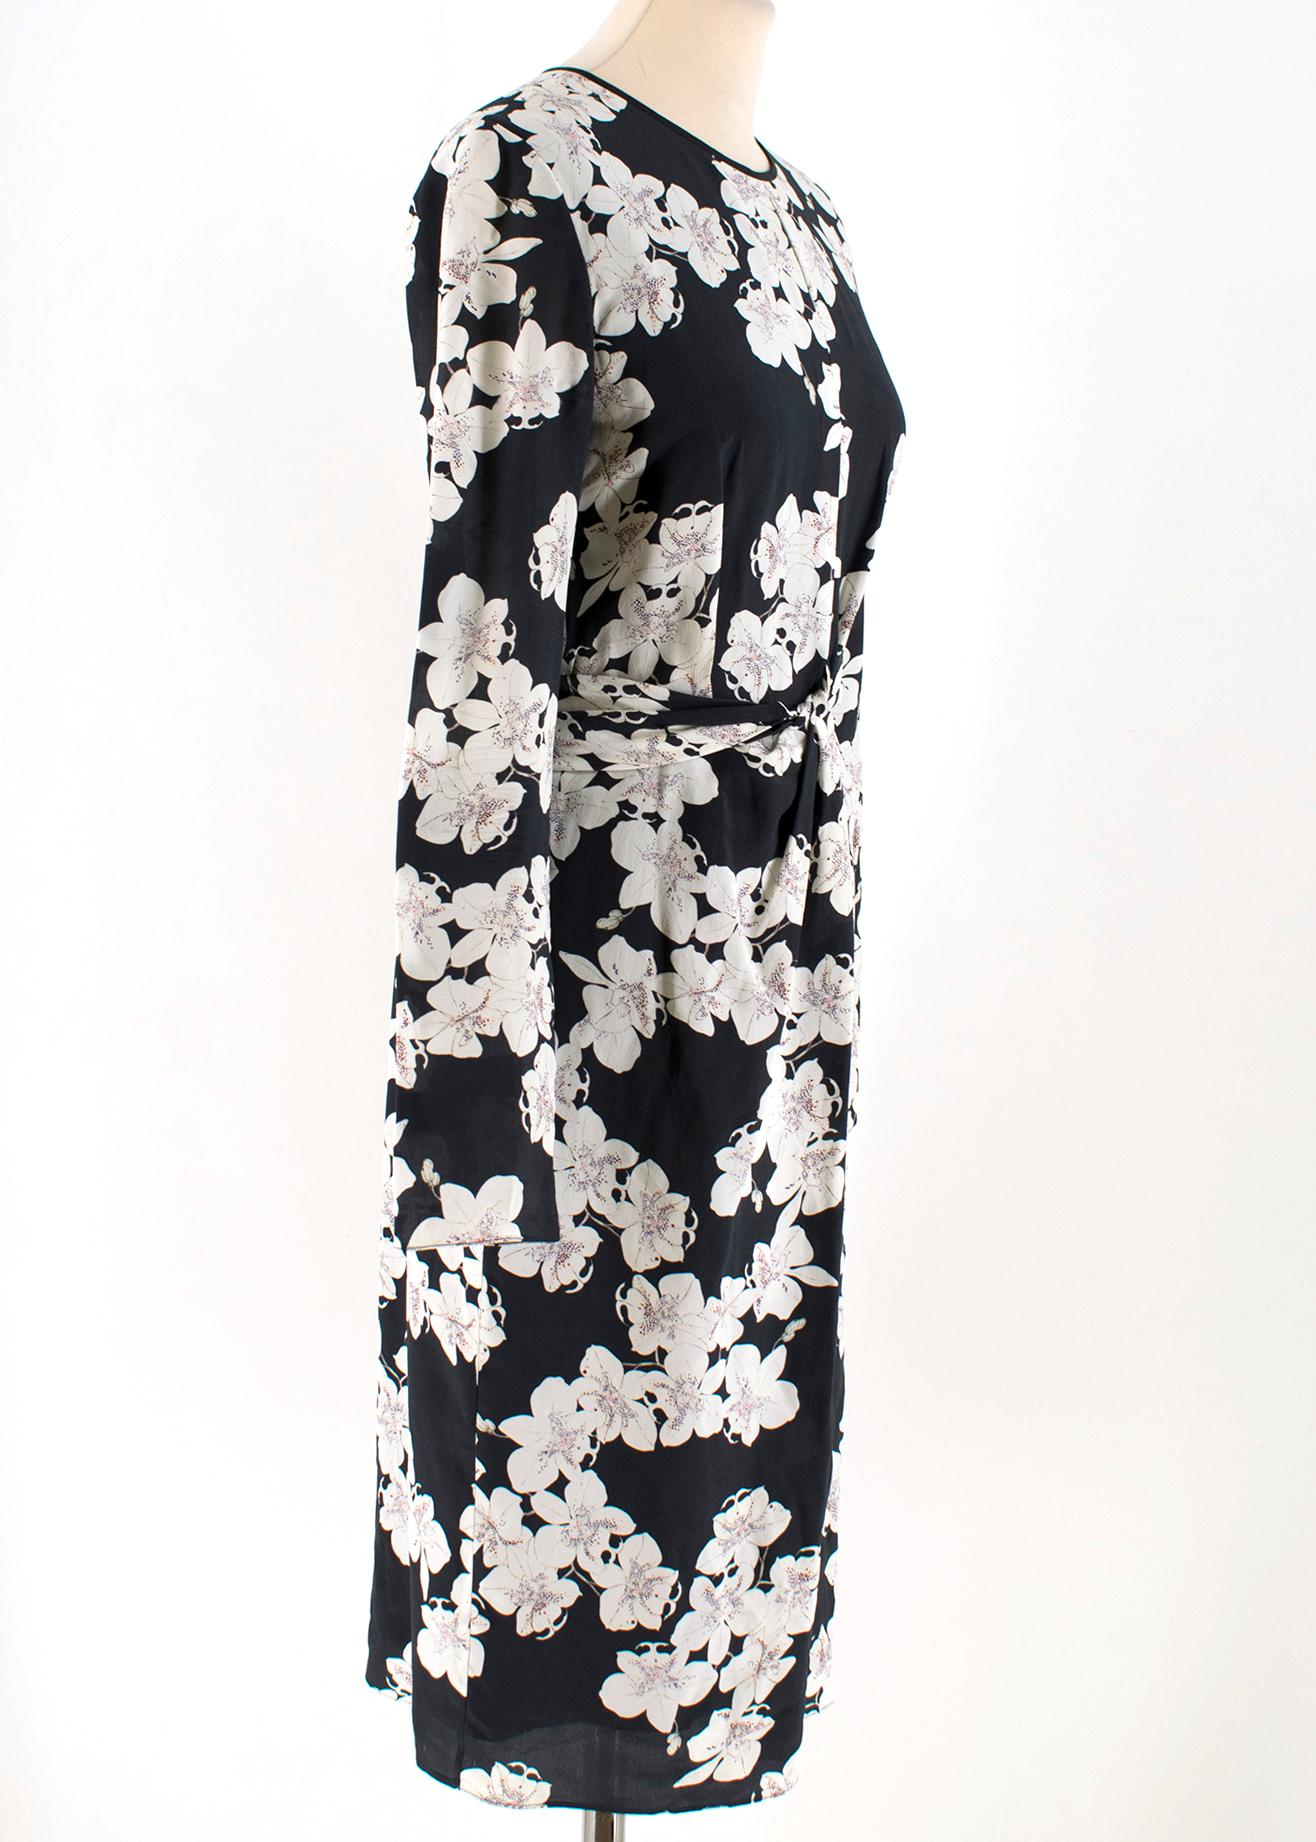 Erdem Navy Blue and White Flower Print Midi Dress

- material- 100% silk
- round neckline 
- long-sleeved
- mid-length
- mini keyhole cut out detail at the front
- back zip fastening
- gathered twist front detail

Please note, these items are